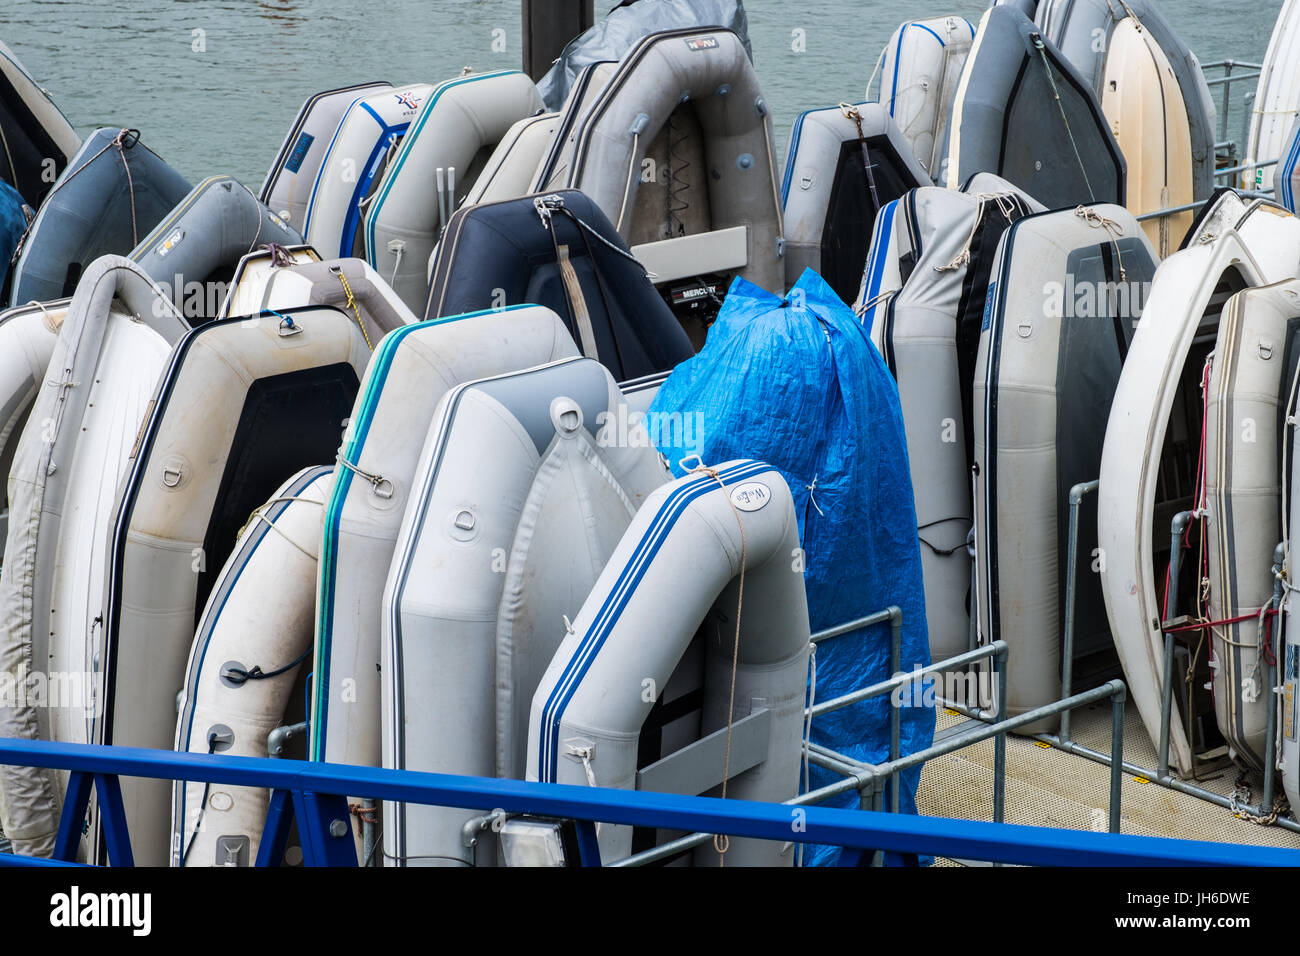 A rack of large and small inflatable boats. Stock Photo